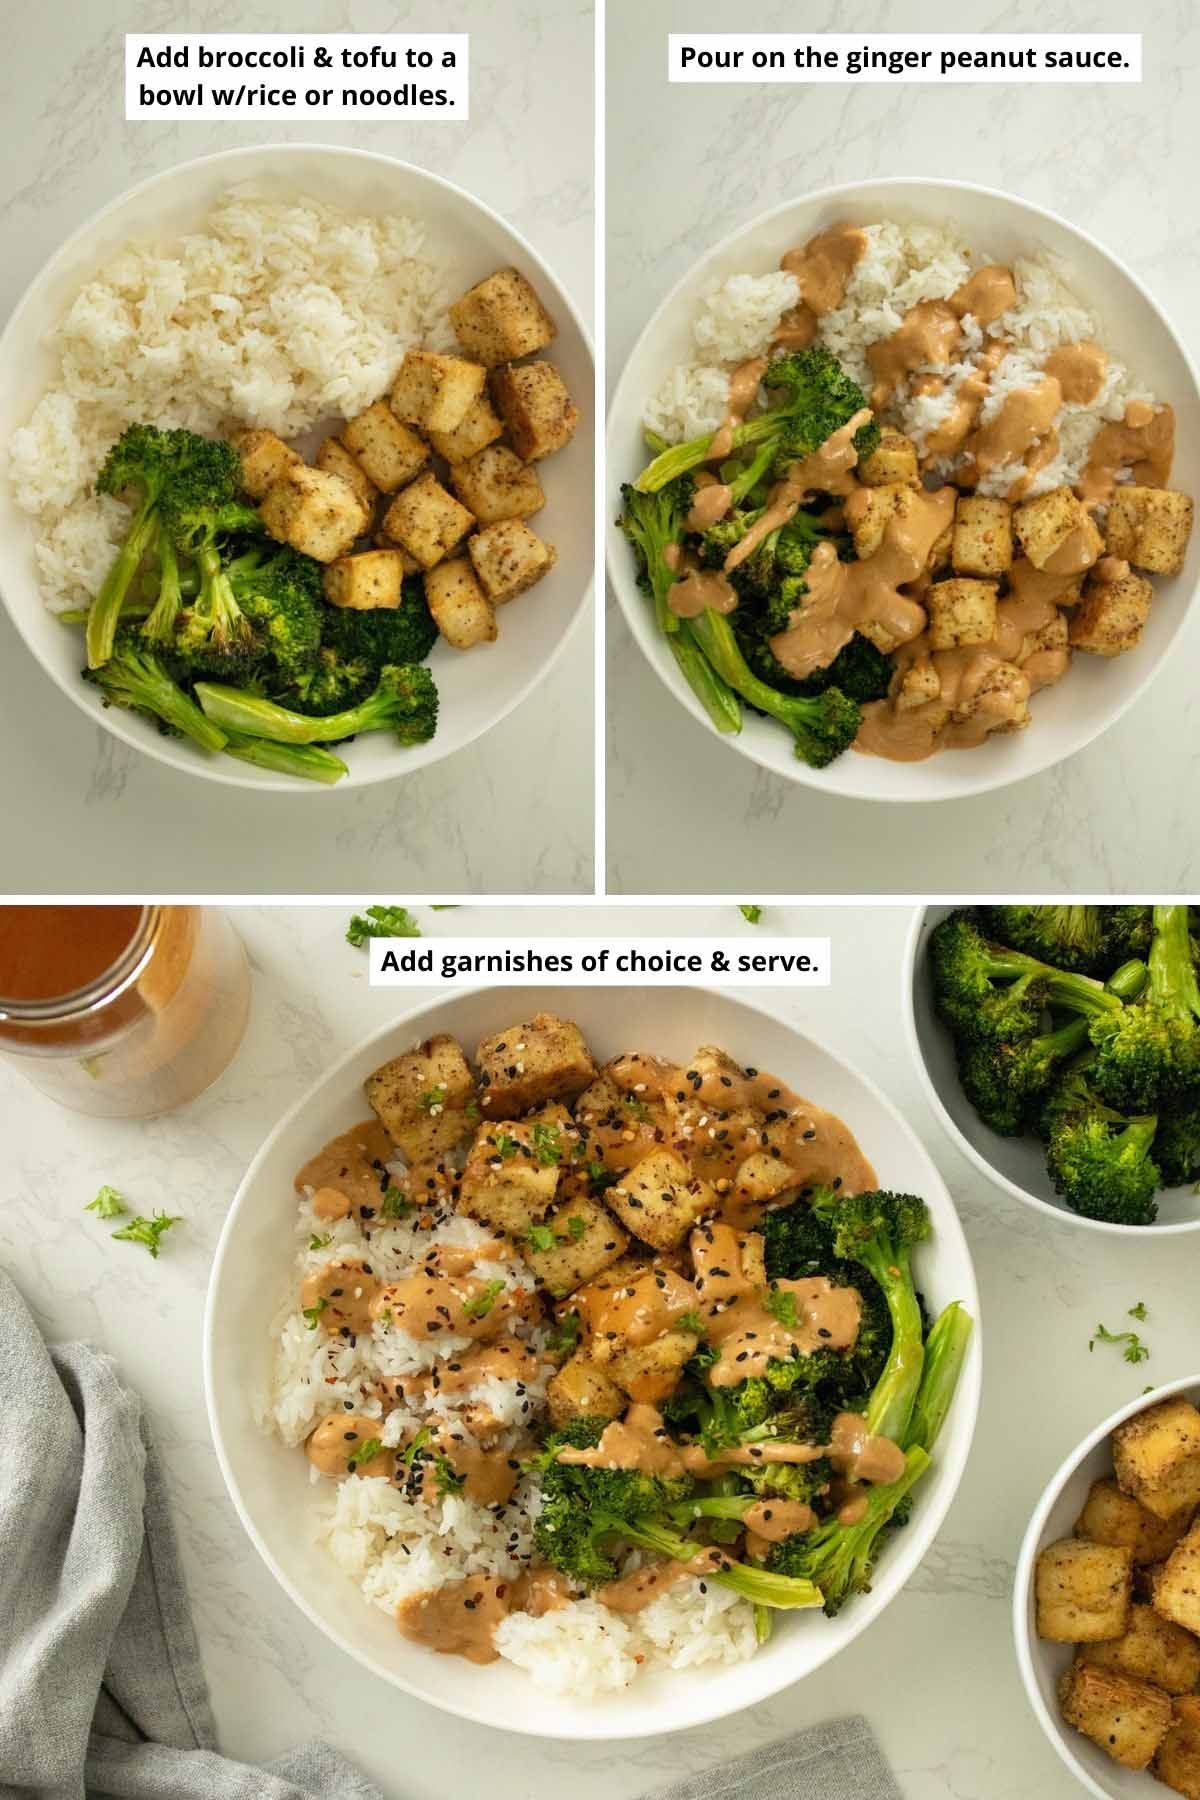 image collage showing baked tofu and broccoli in a bowl with rice, adding the peanut sauce, and adding the garnishes